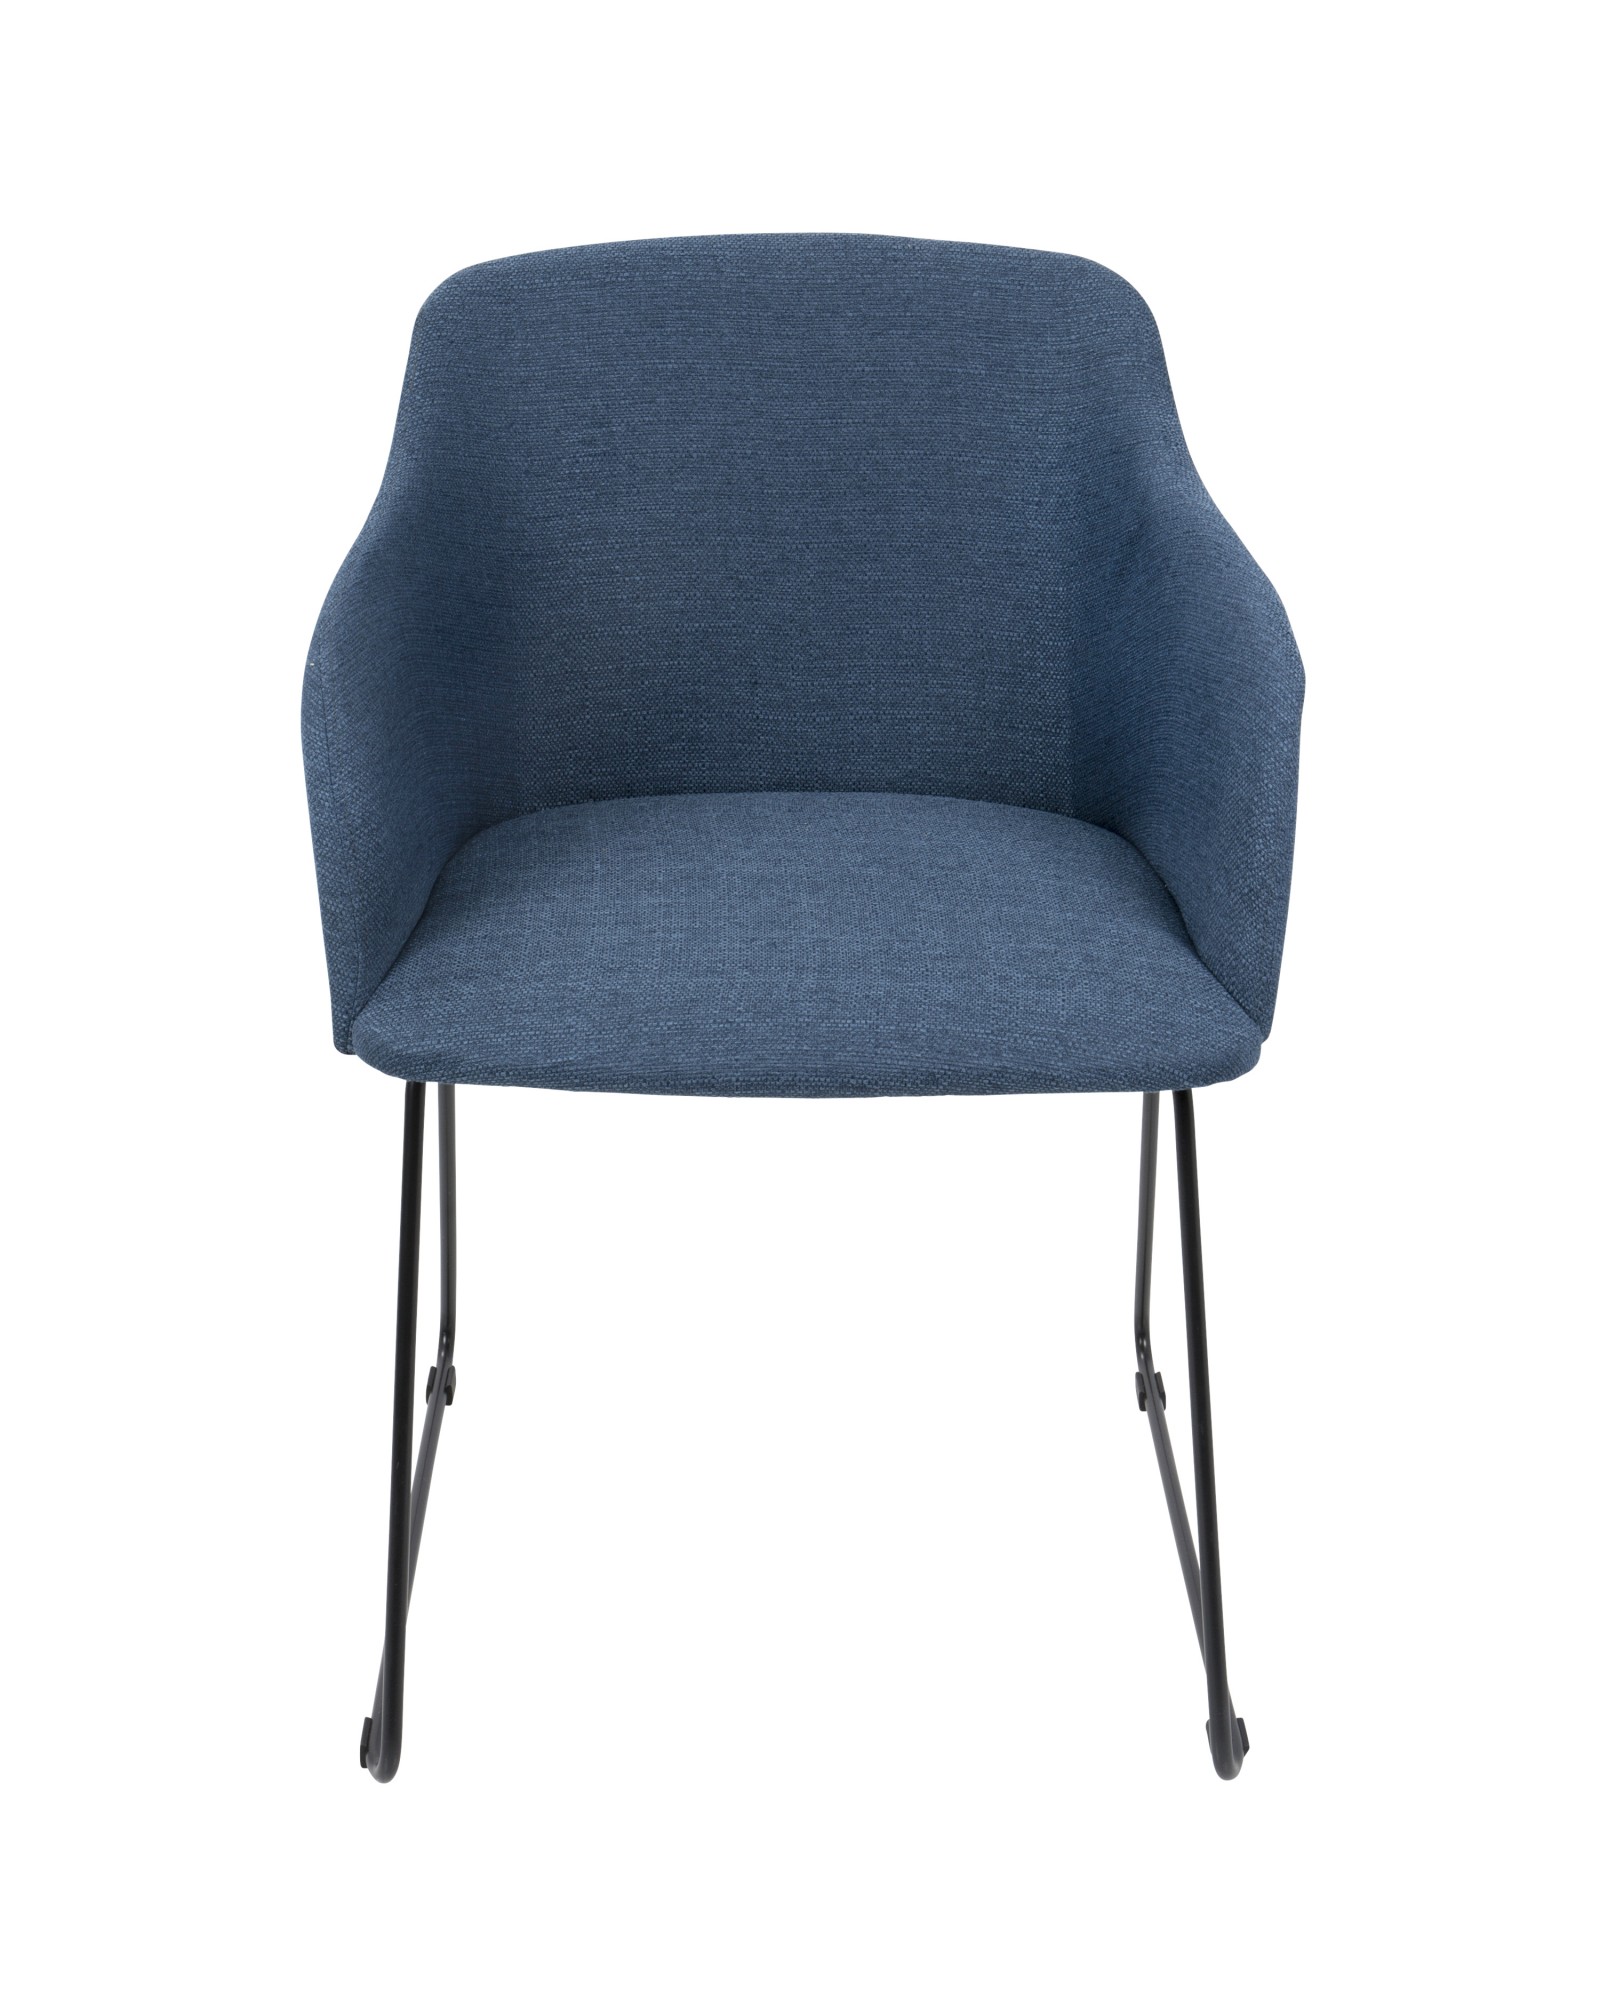 Daniella Contemporary Dining/Accent Chair in Blue - Set of 2